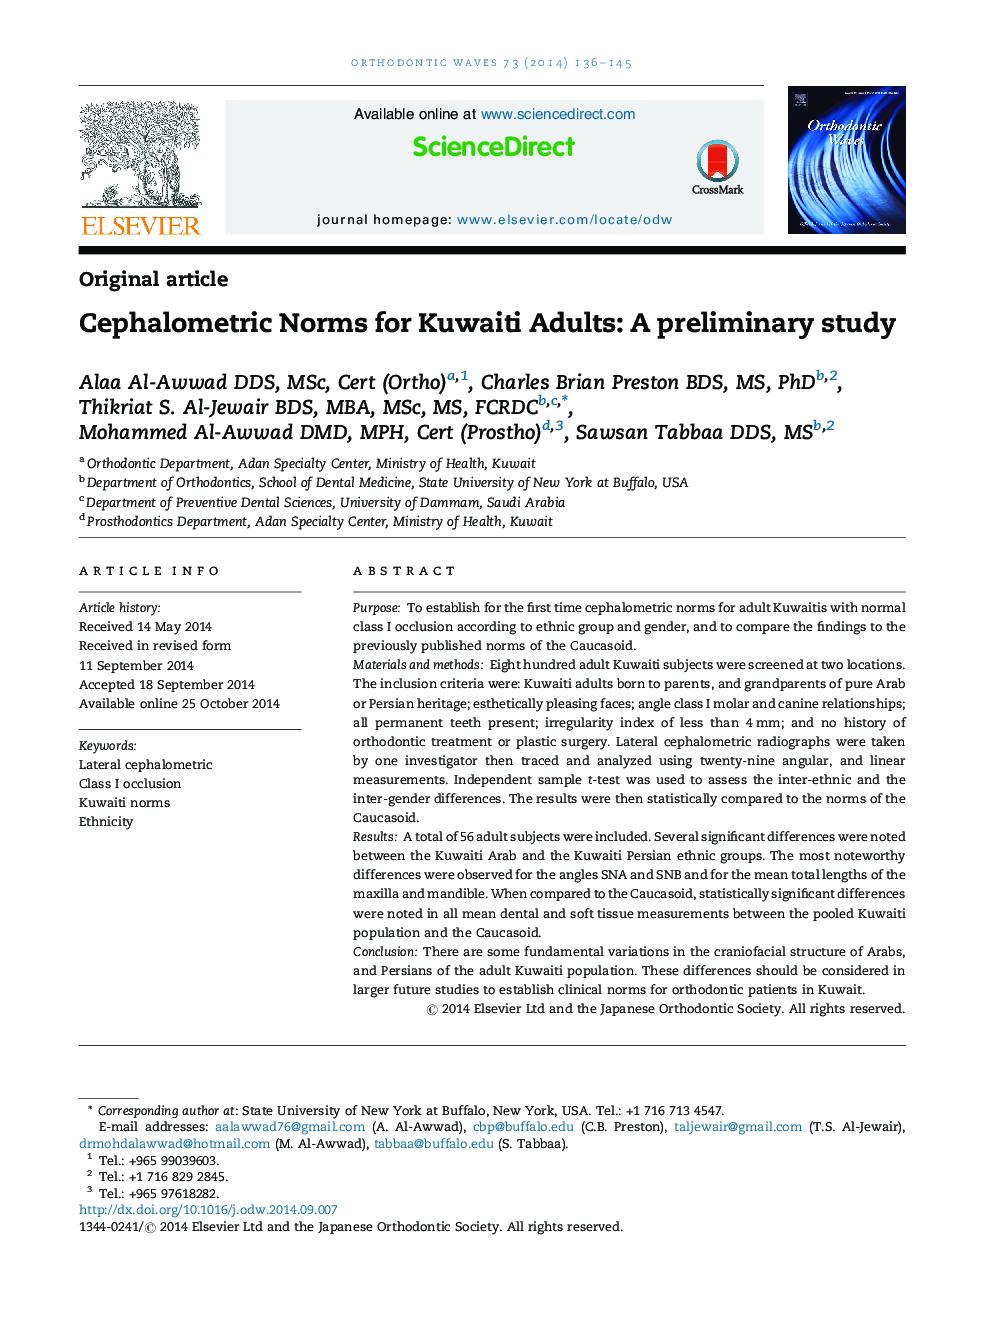 Cephalometric Norms for Kuwaiti Adults: A preliminary study